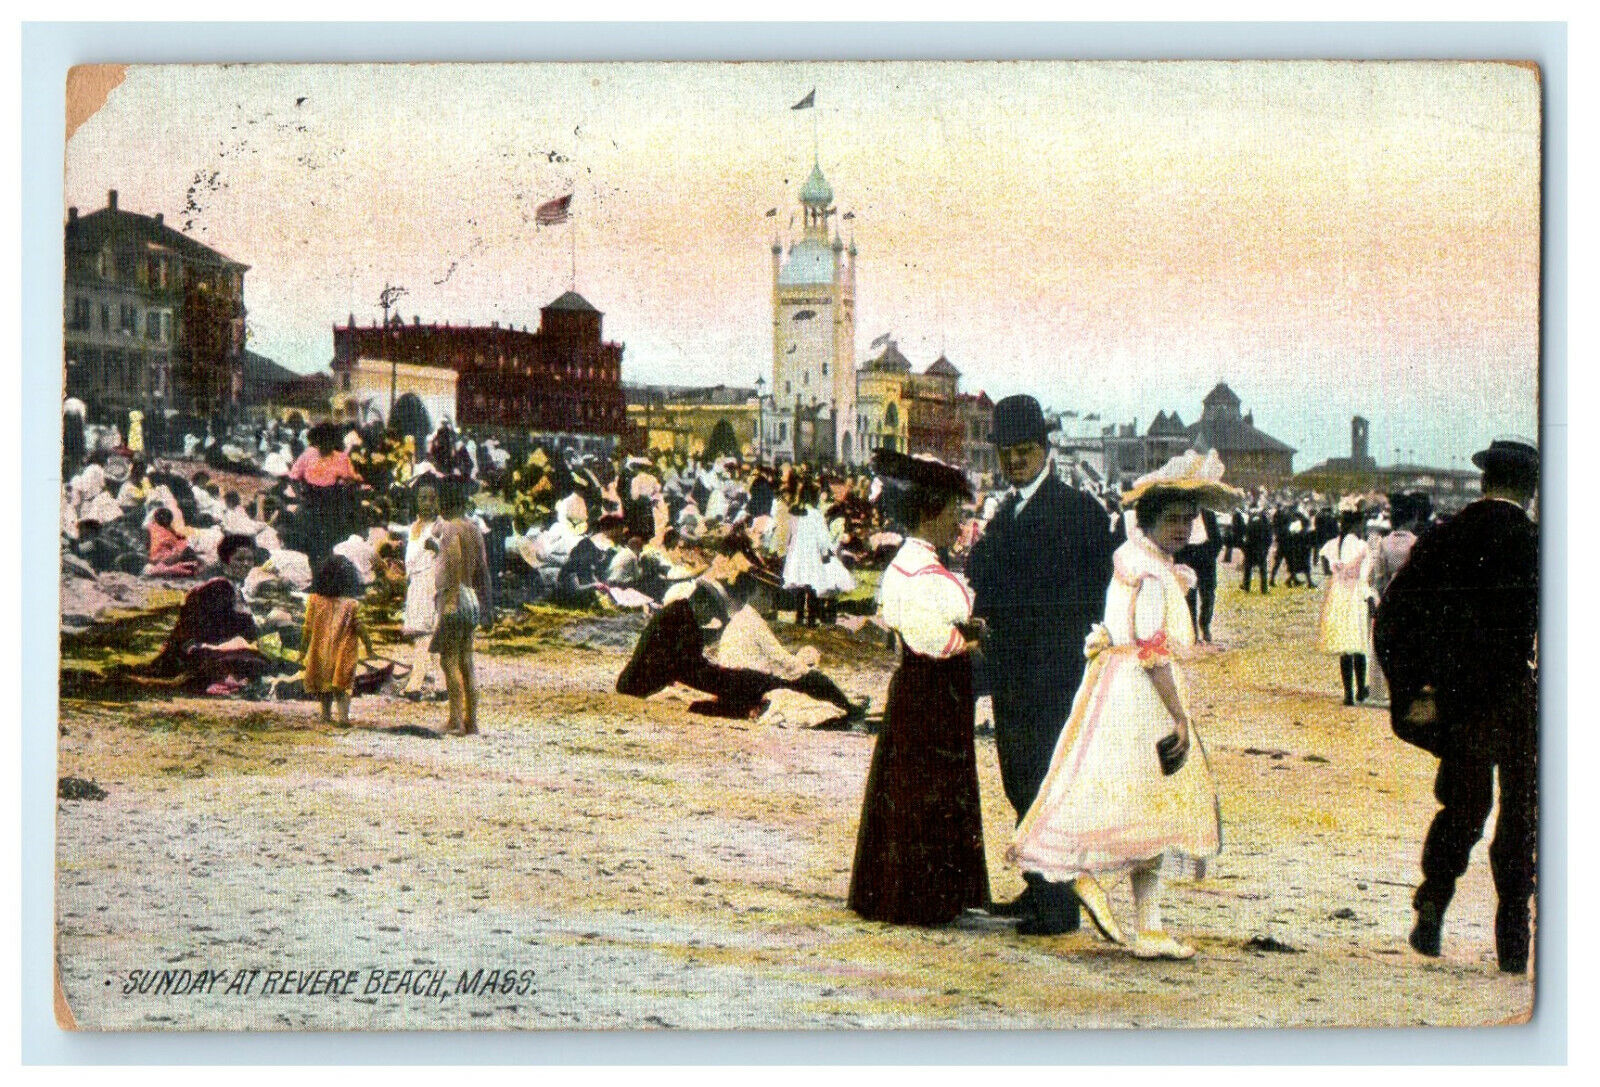 1909 Sunday at Revere Beach Massachusetts MA Antique Posted Postcard